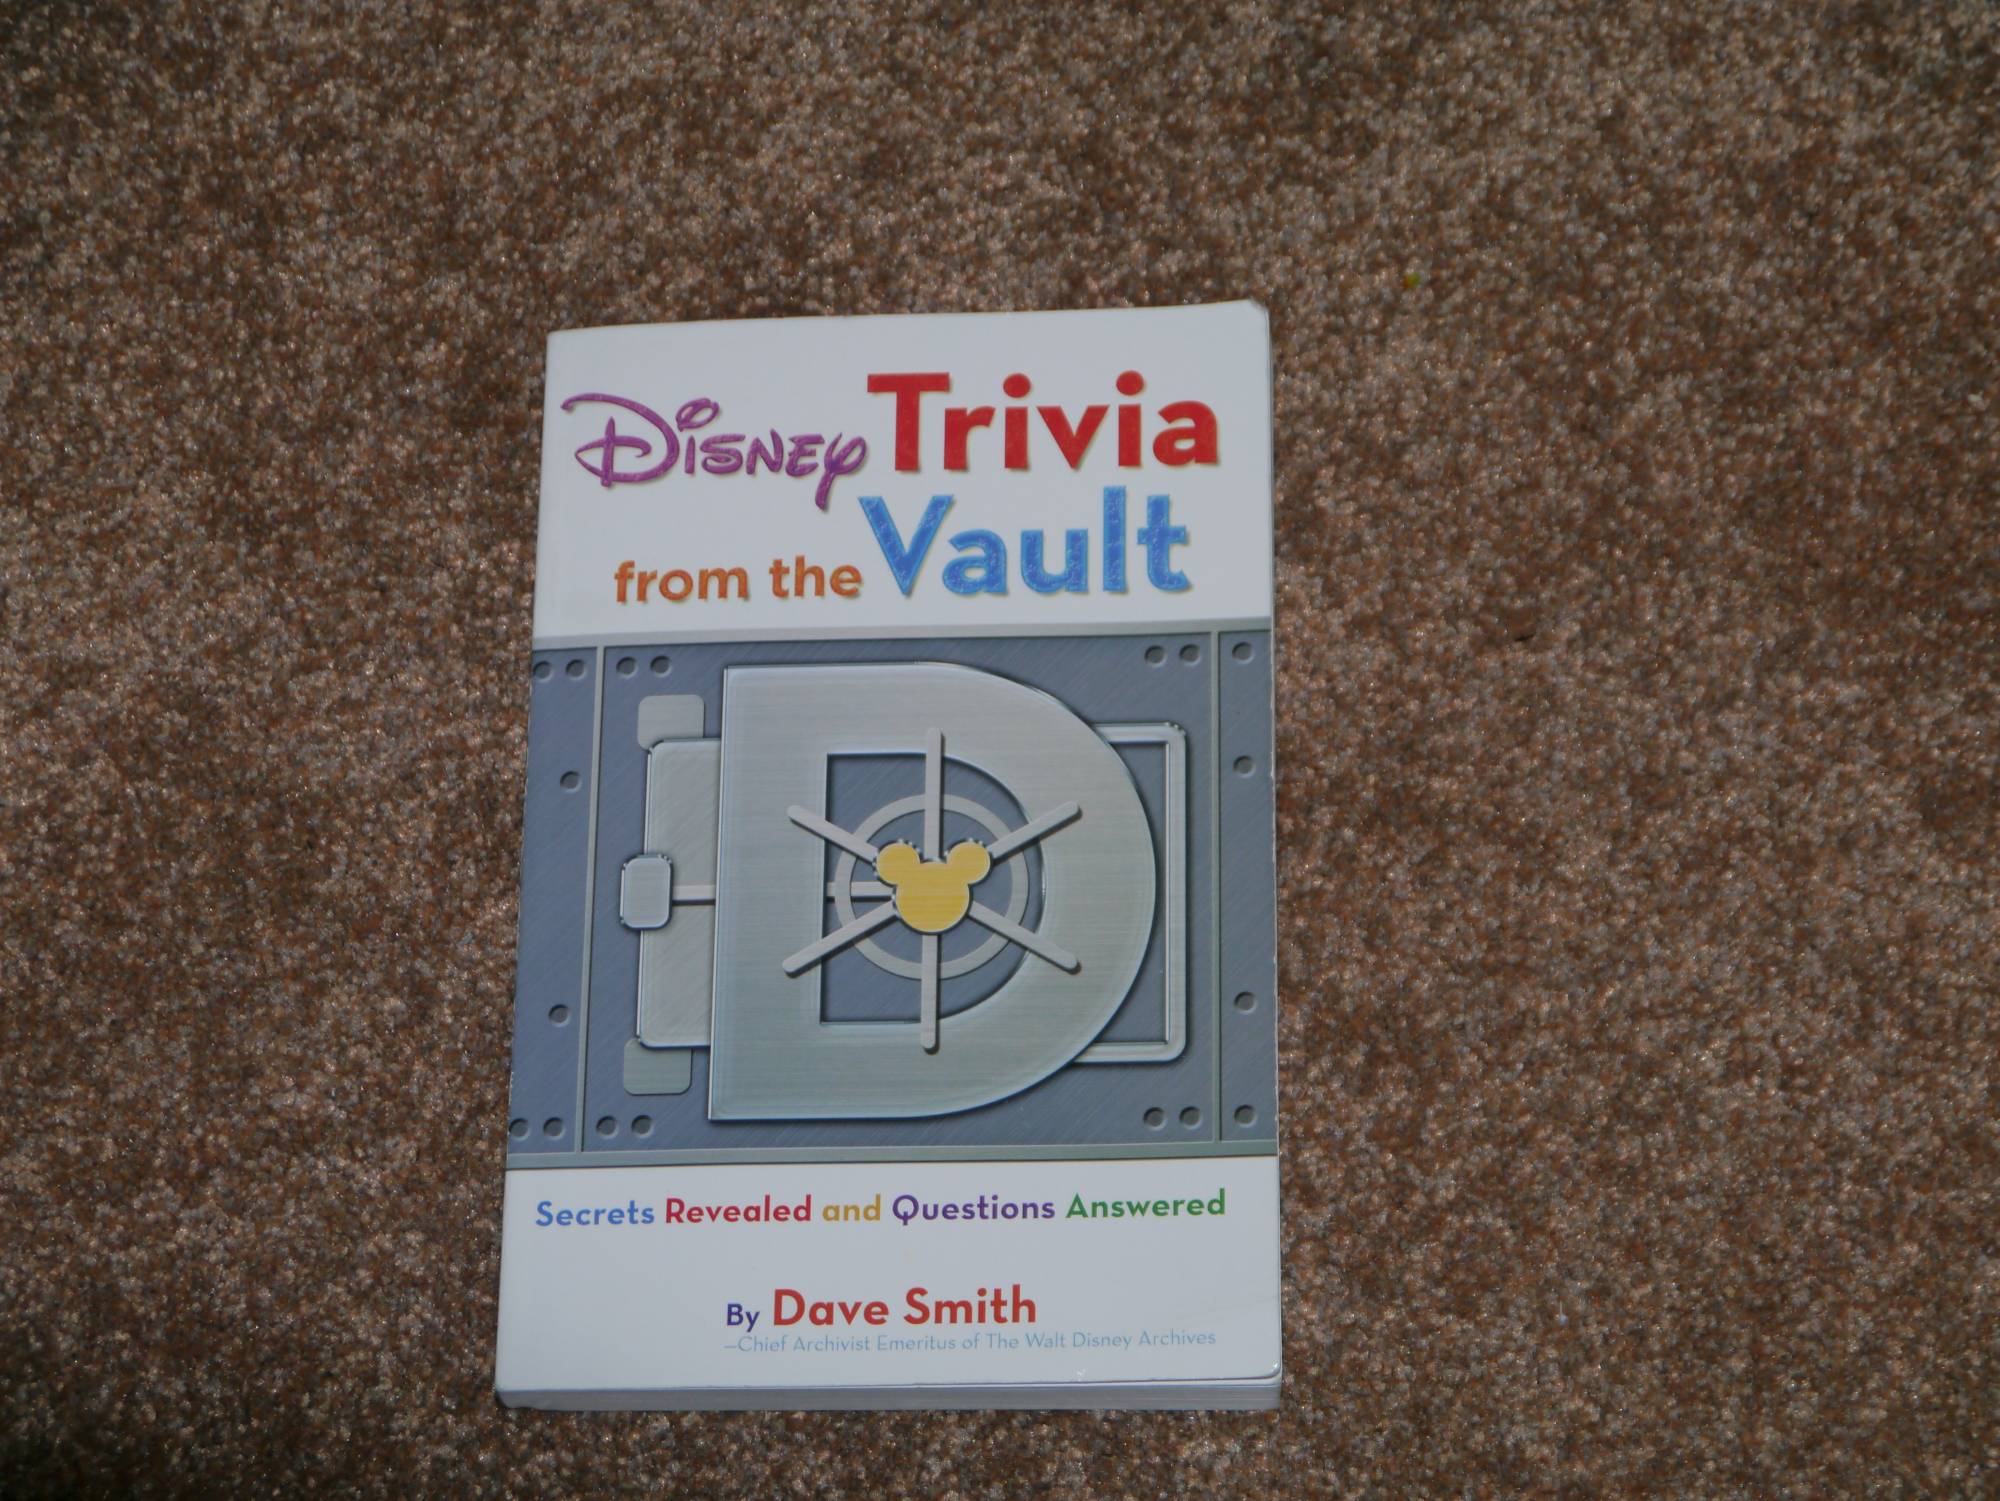 Brush up on your Disney Trivia with this review of 'Disney Trivia from The Vault' by Dave Smith | PassPorter.com